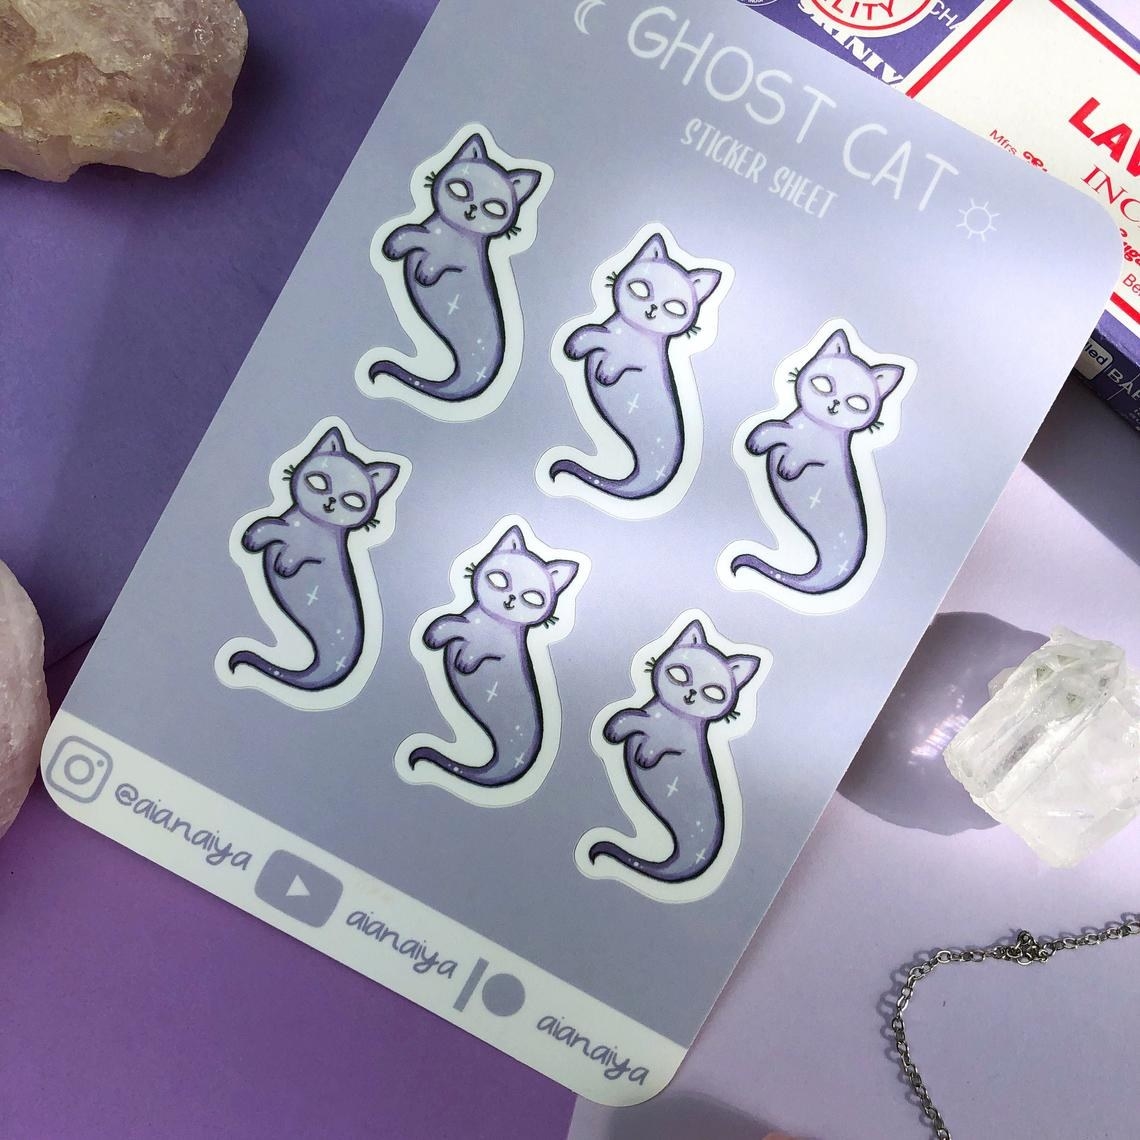 A set of stickers with ghost cats